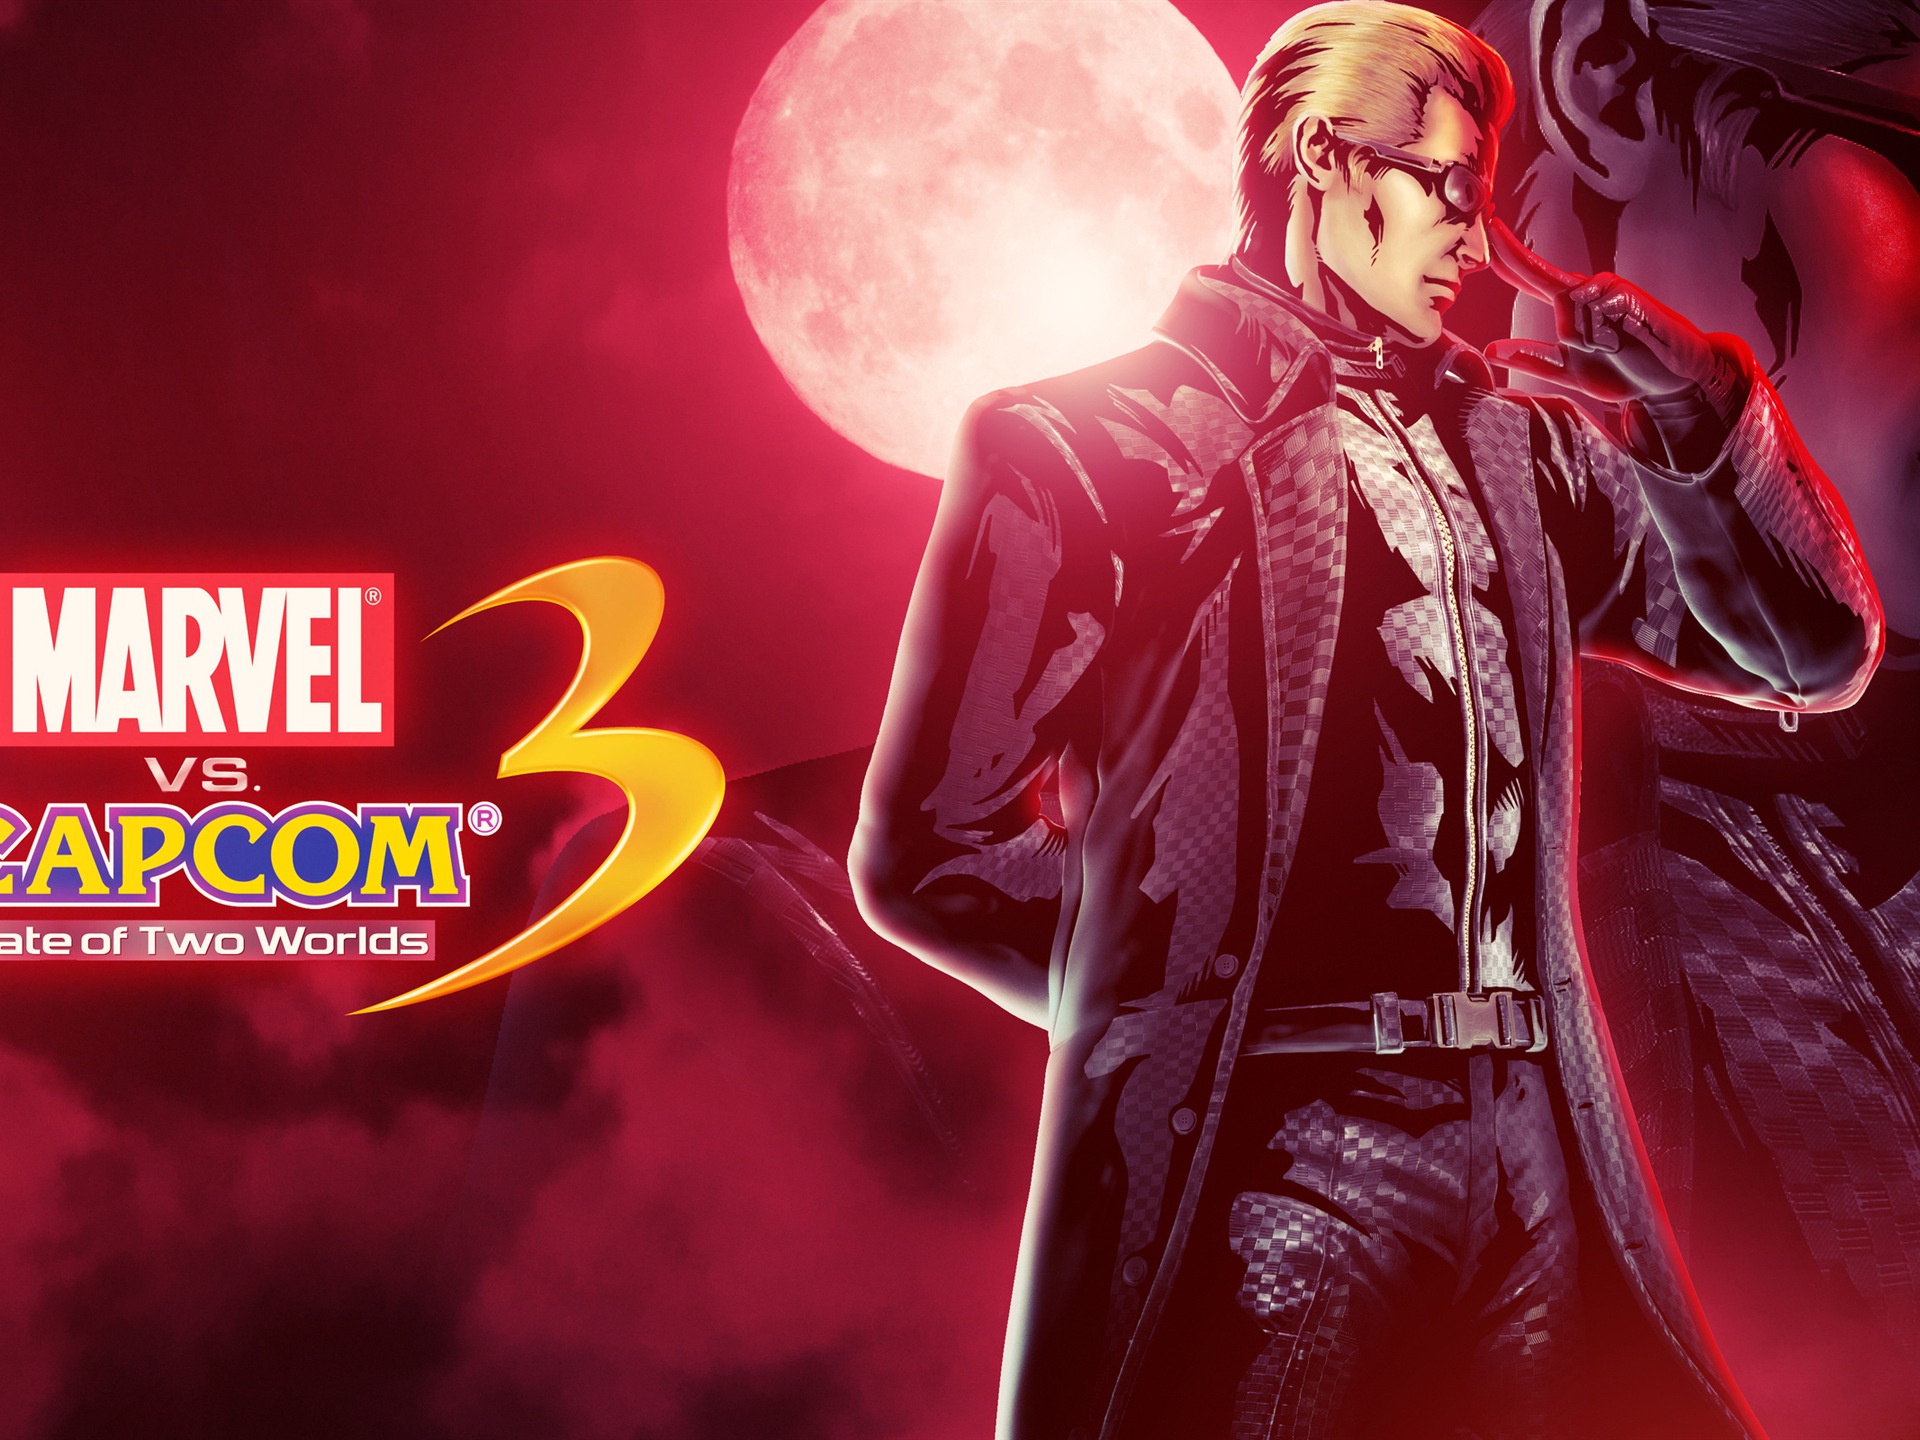 Marvel VS. Capcom 3: Fate of Two Worlds HD game wallpapers #9 - 1920x1440